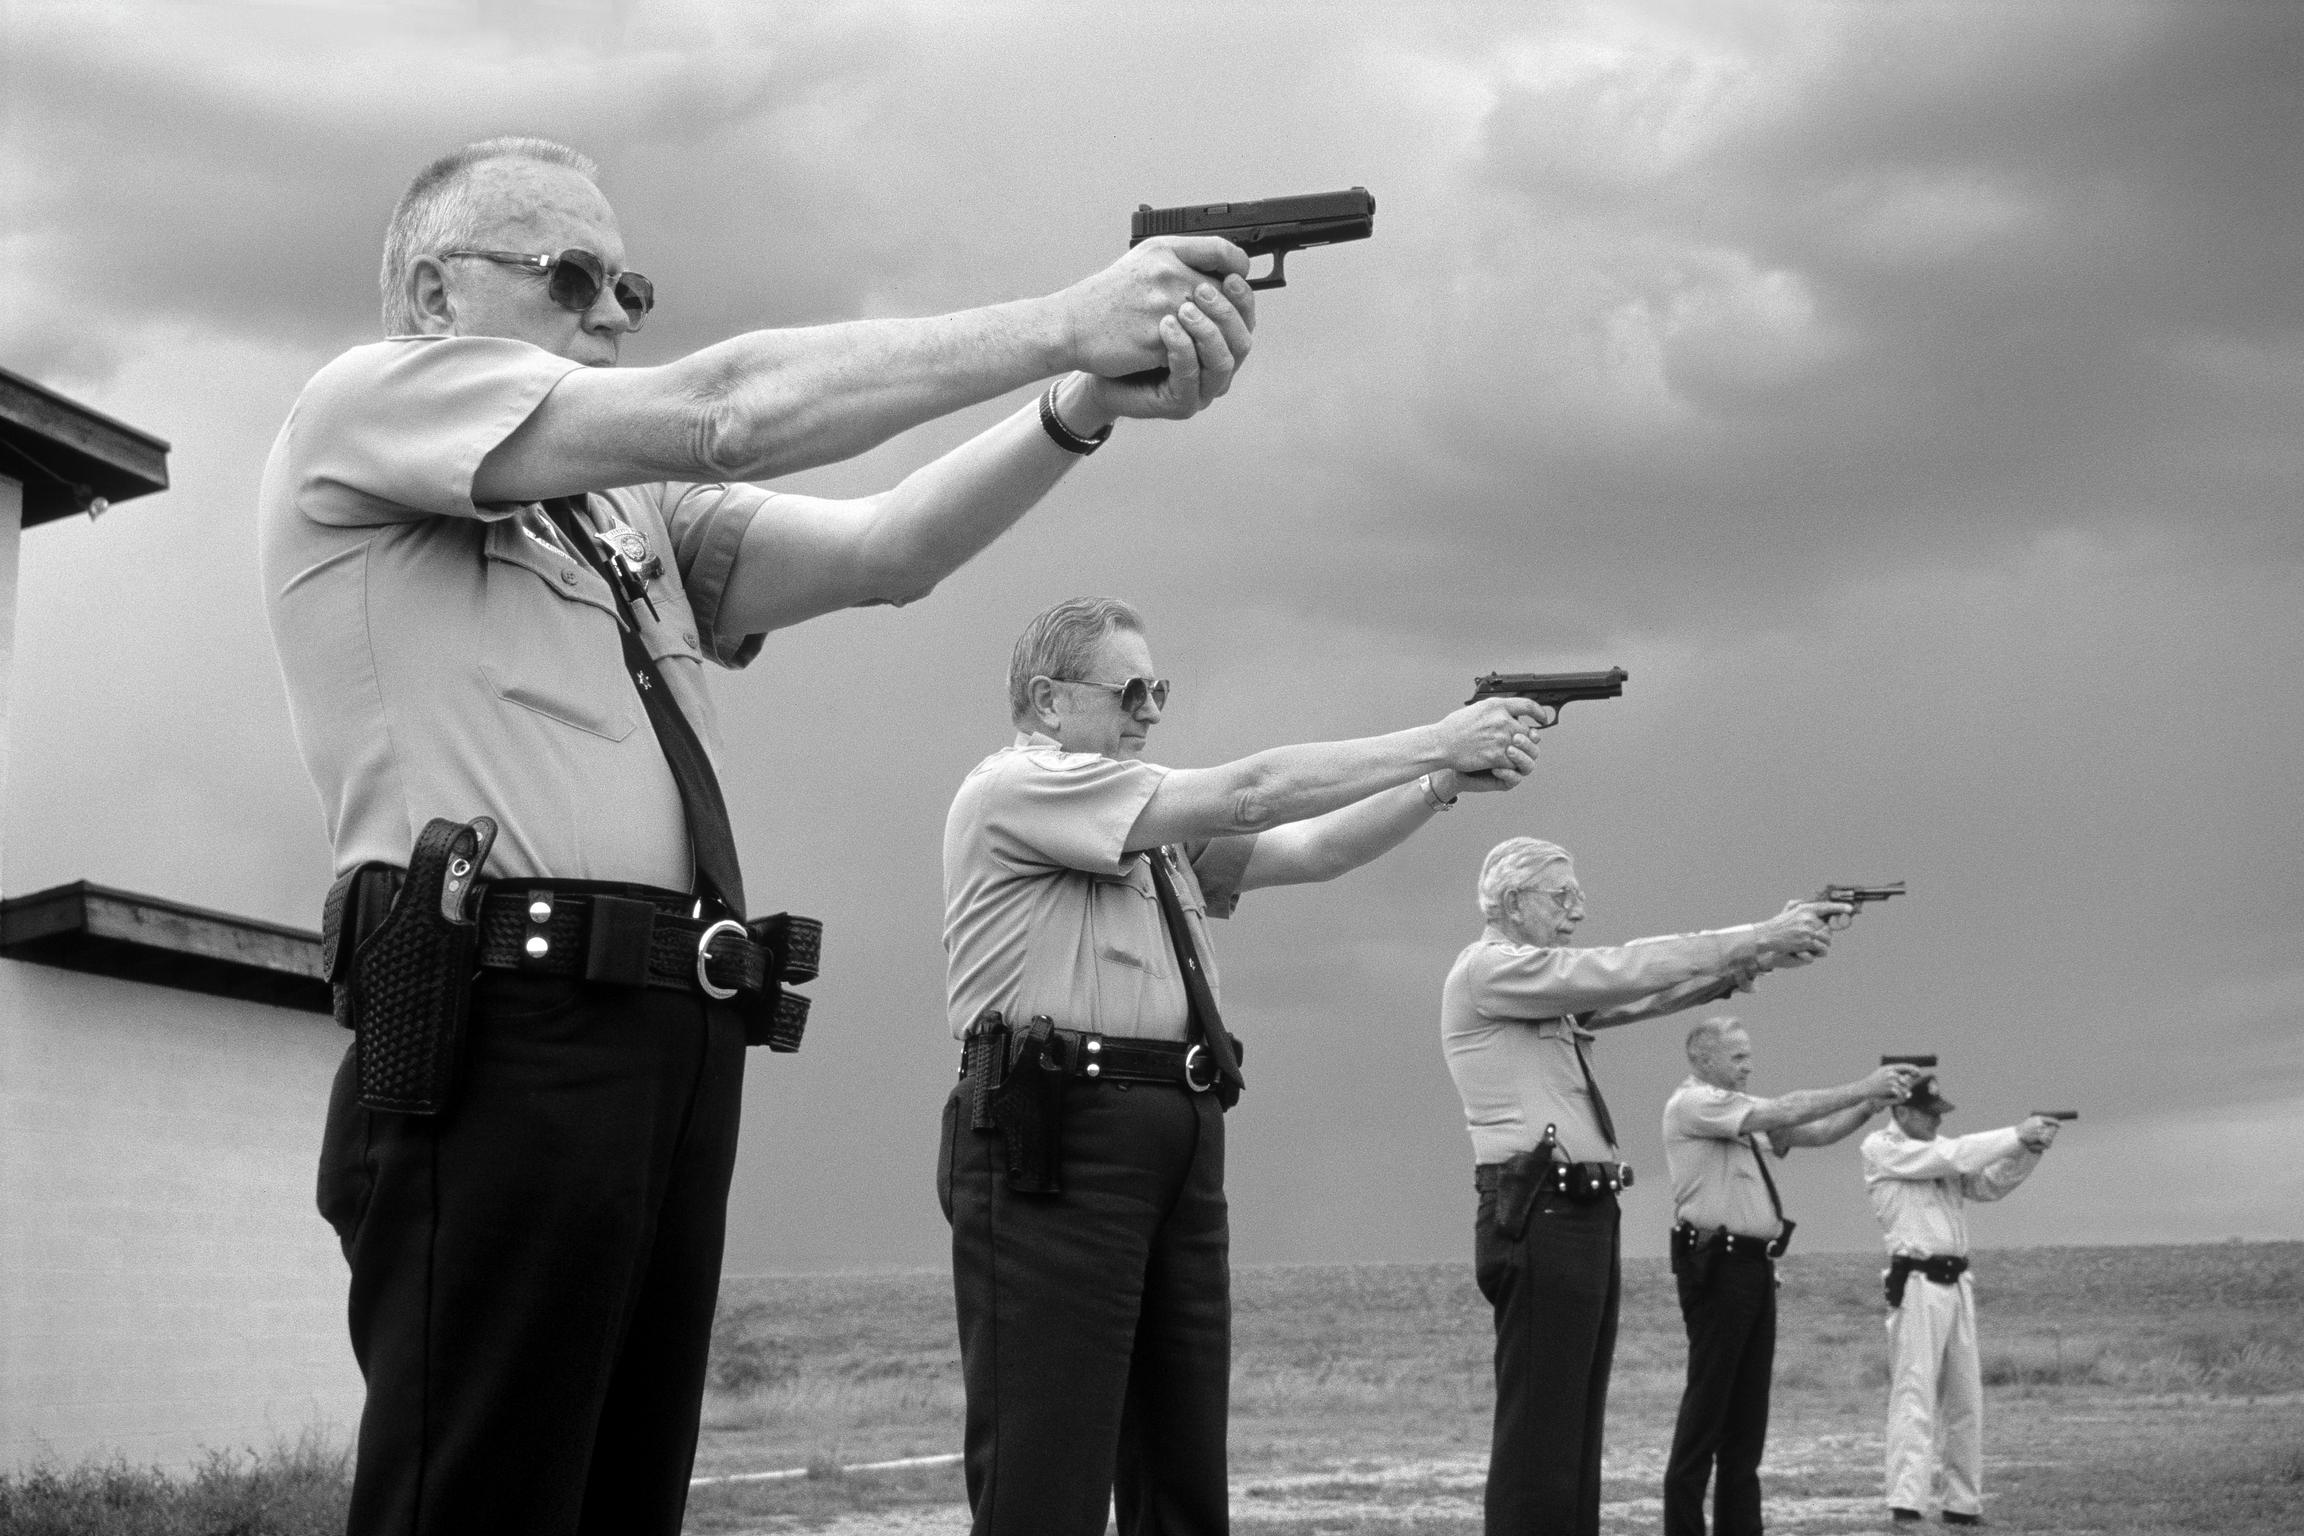 Retirement members of Sheriff Posse, the police of Sun City at weapons practice. Sun City, Arizona USA